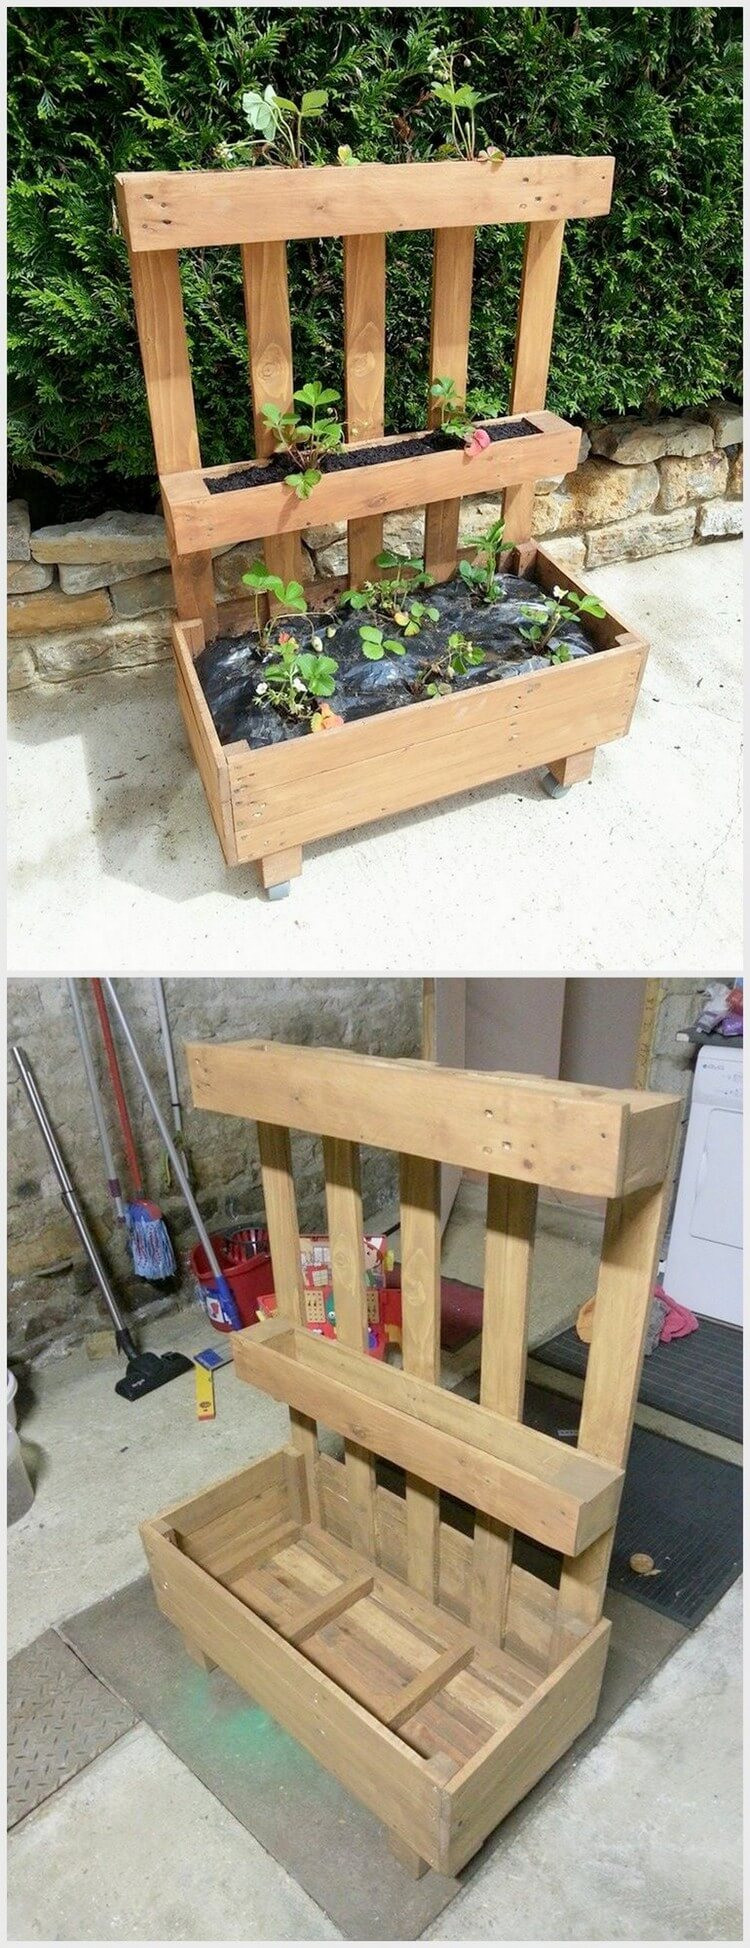 DIY With Wooden Pallets
 25 DIY Recycled Wooden Pallet Projects Try out at Home